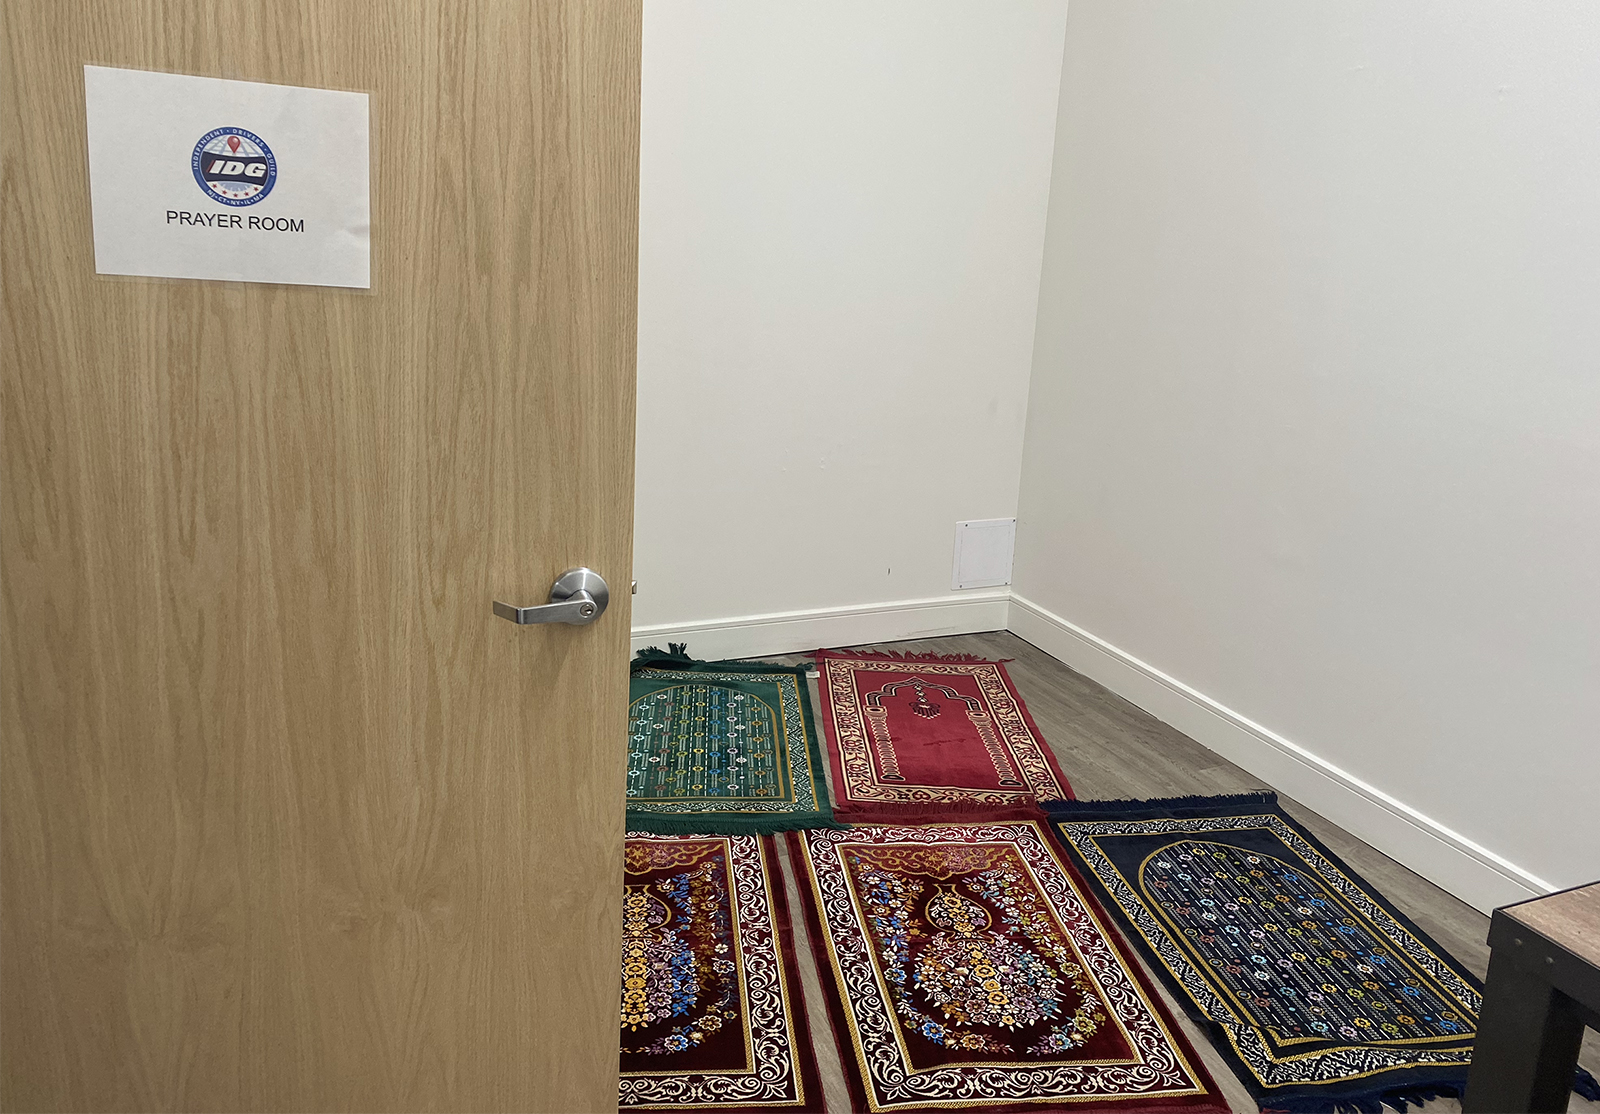 The prayer room at the Independent Drivers Guild (IDG) offices in Long Island City, New York. Photo by Tori Luecking